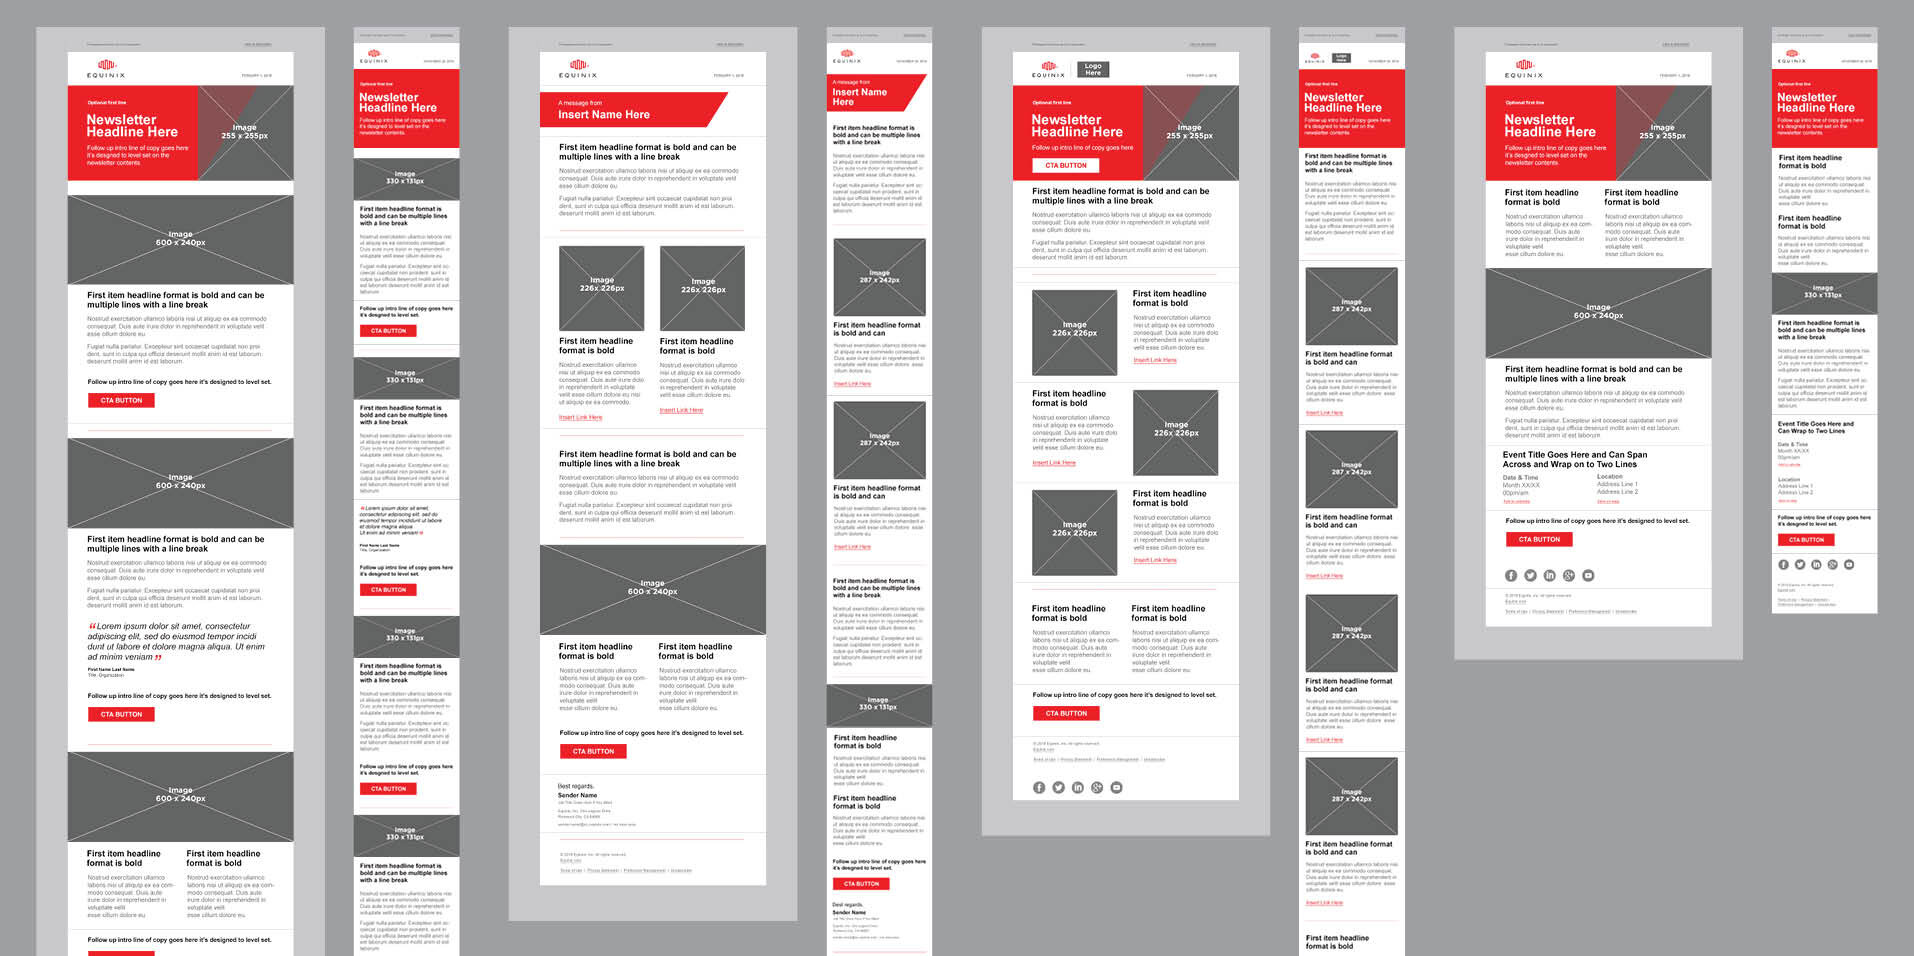 Email Modules Carousel Images4.jpg